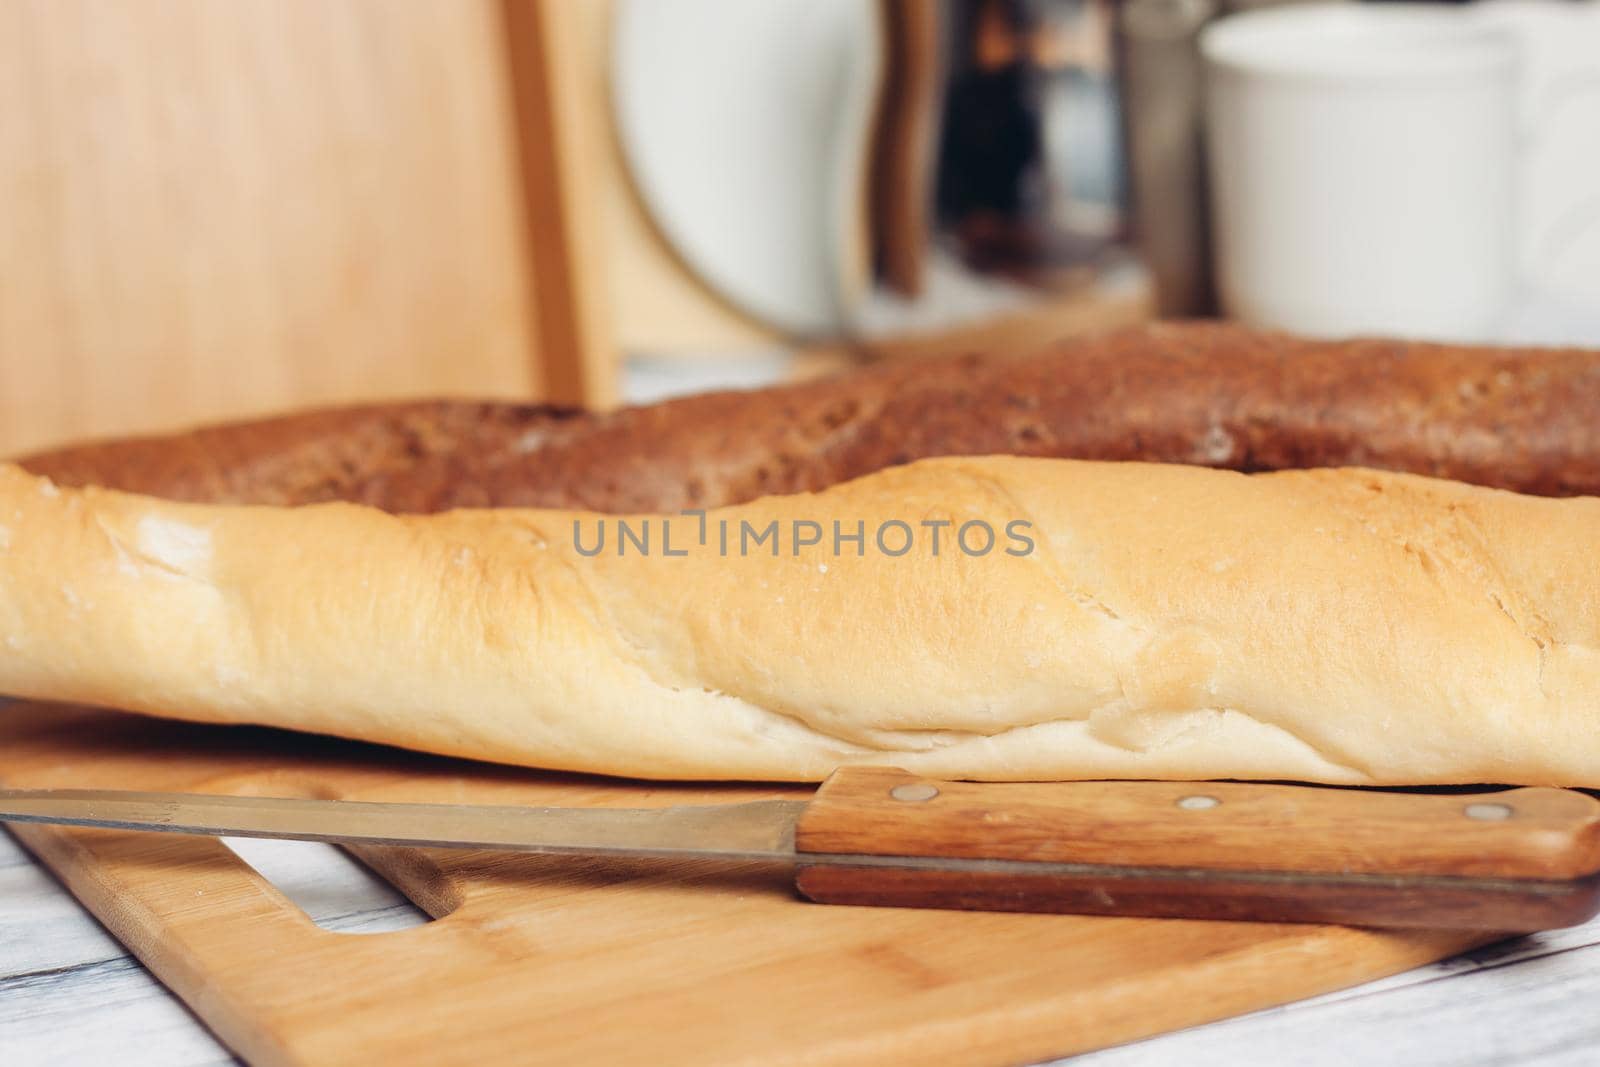 rifled cartridges cutting board kitchen breakfast baked goods. High quality photo